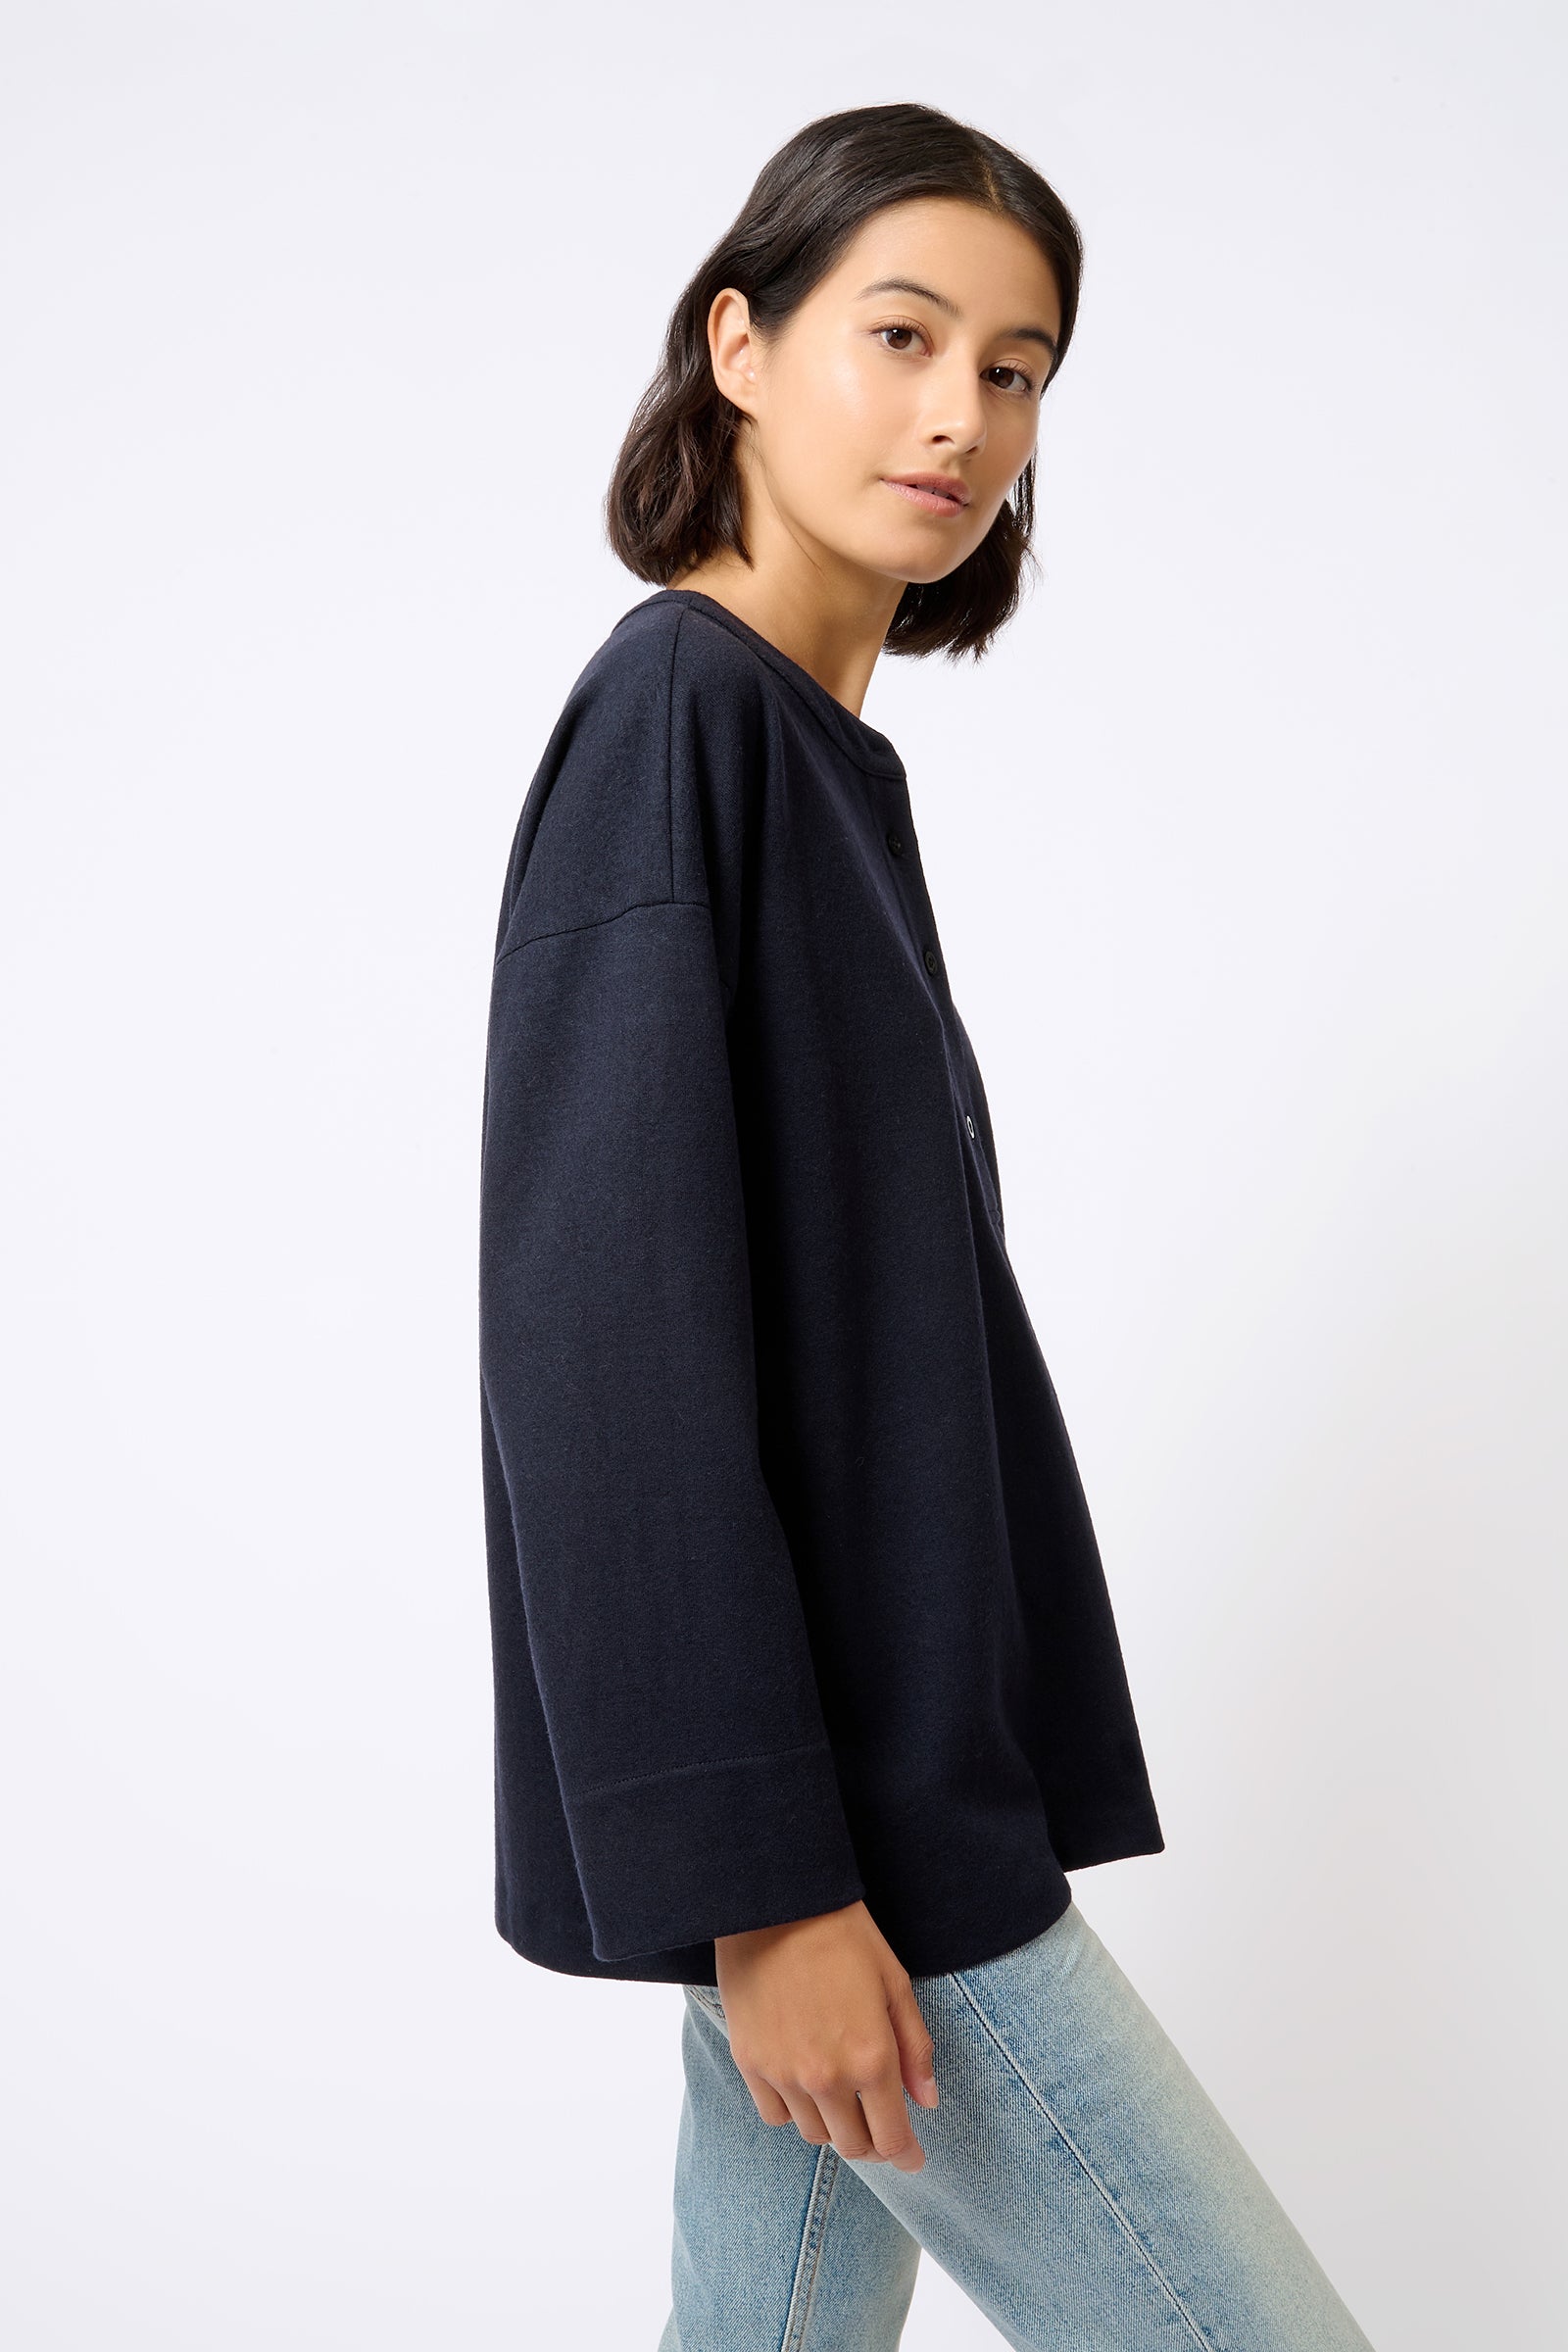 Kal Rieman Band Collar Top in Midnight on Model Side View